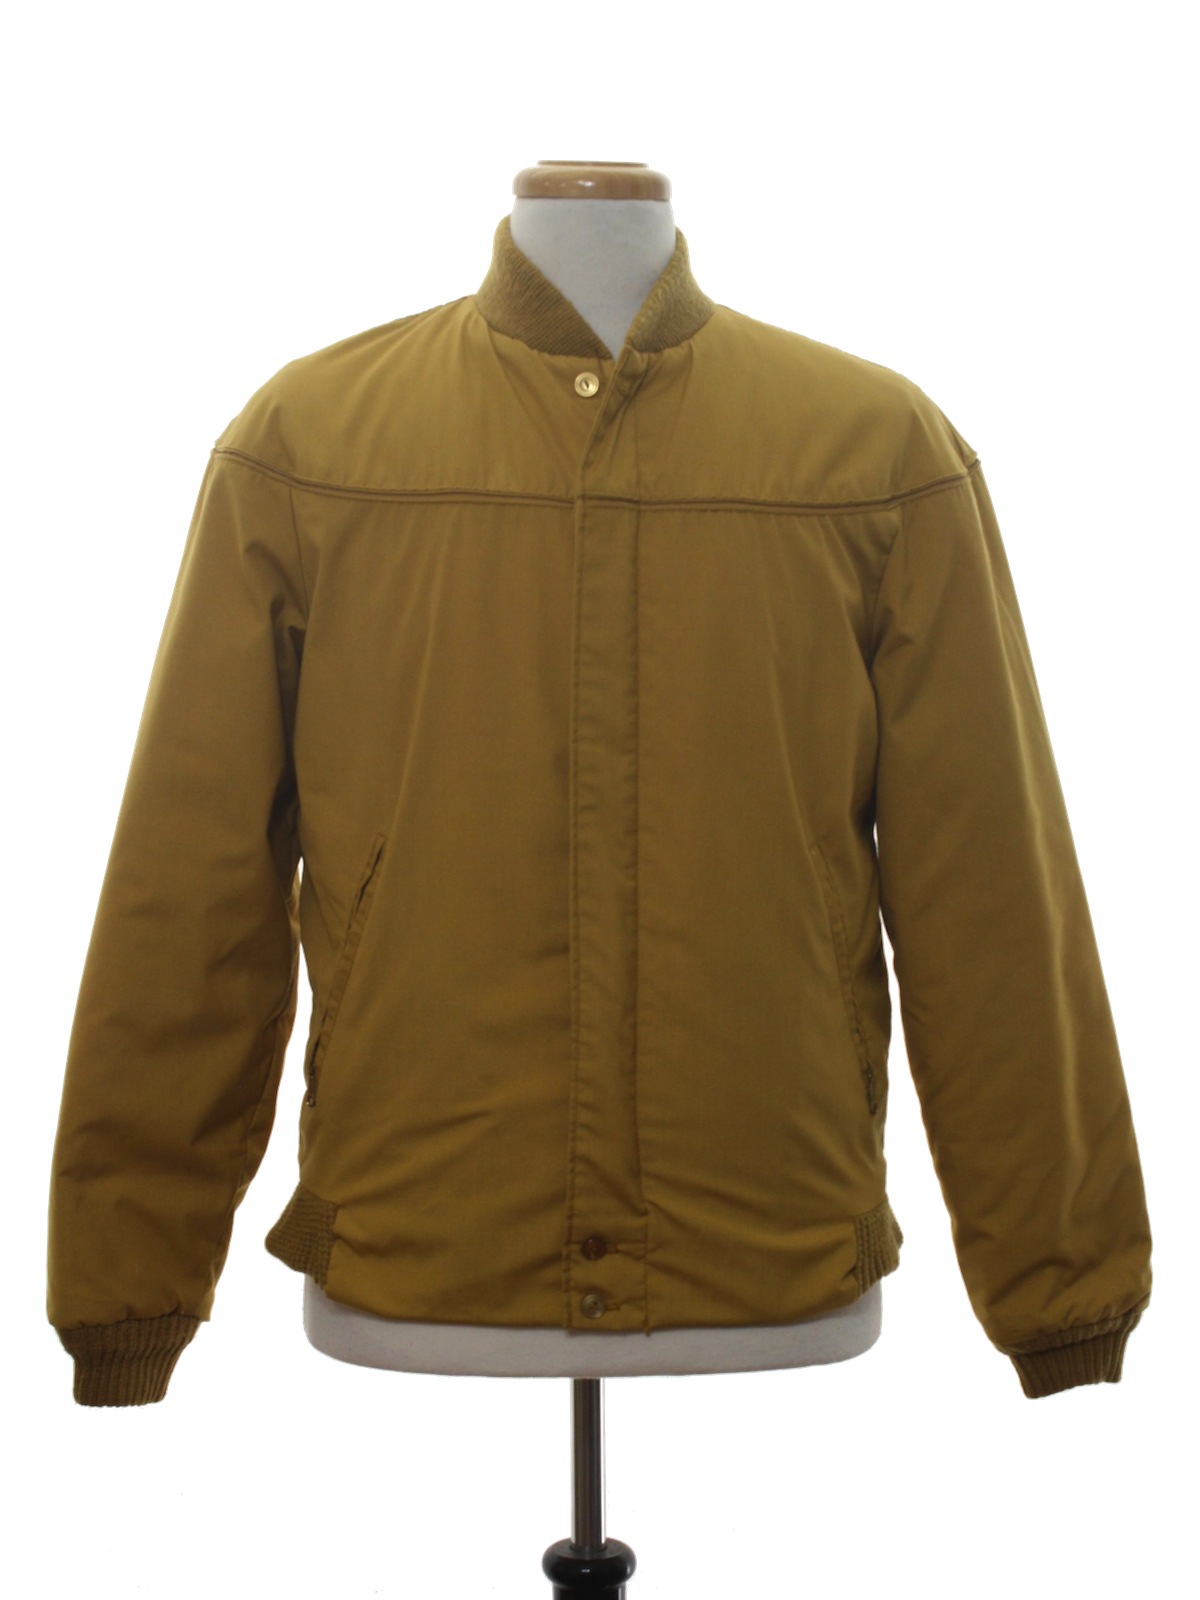 Retro 60s Jacket (Towncraft) : 60s -Towncraft- Mens ochre cotton polyester poplin casual